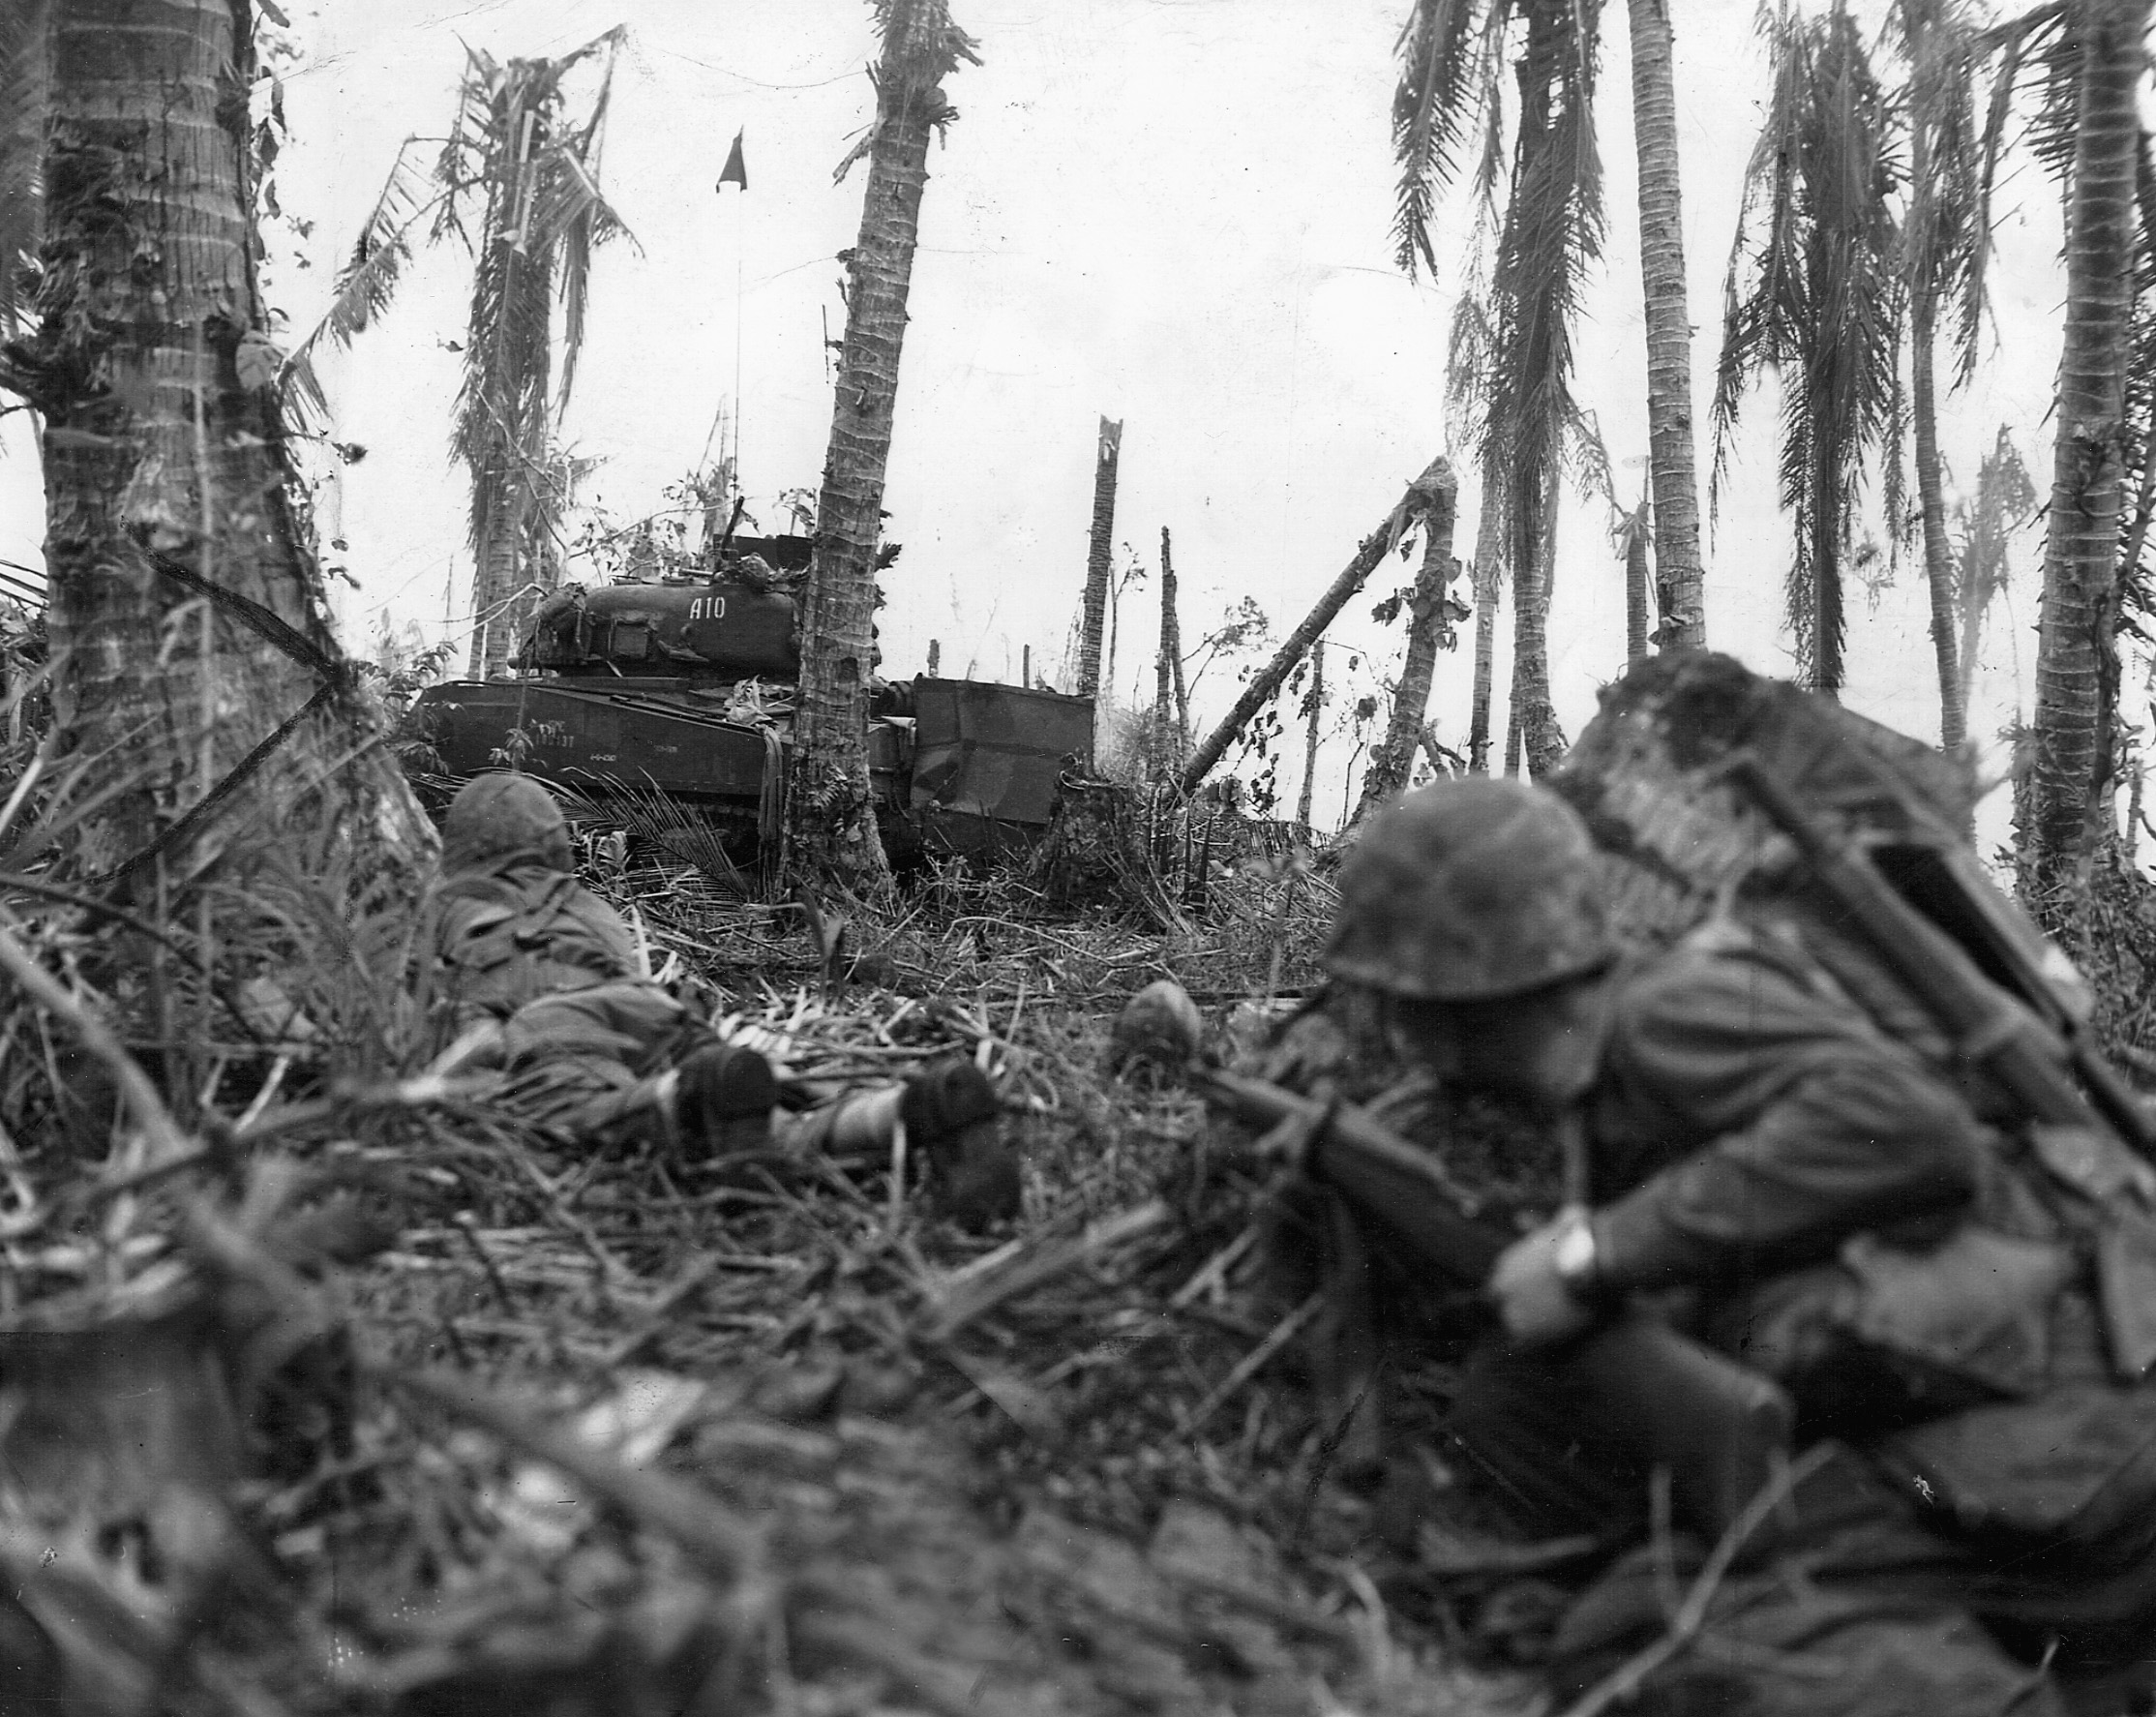 Two Marines crouch low, while cautiously making their way towards a Japanese stronghold.